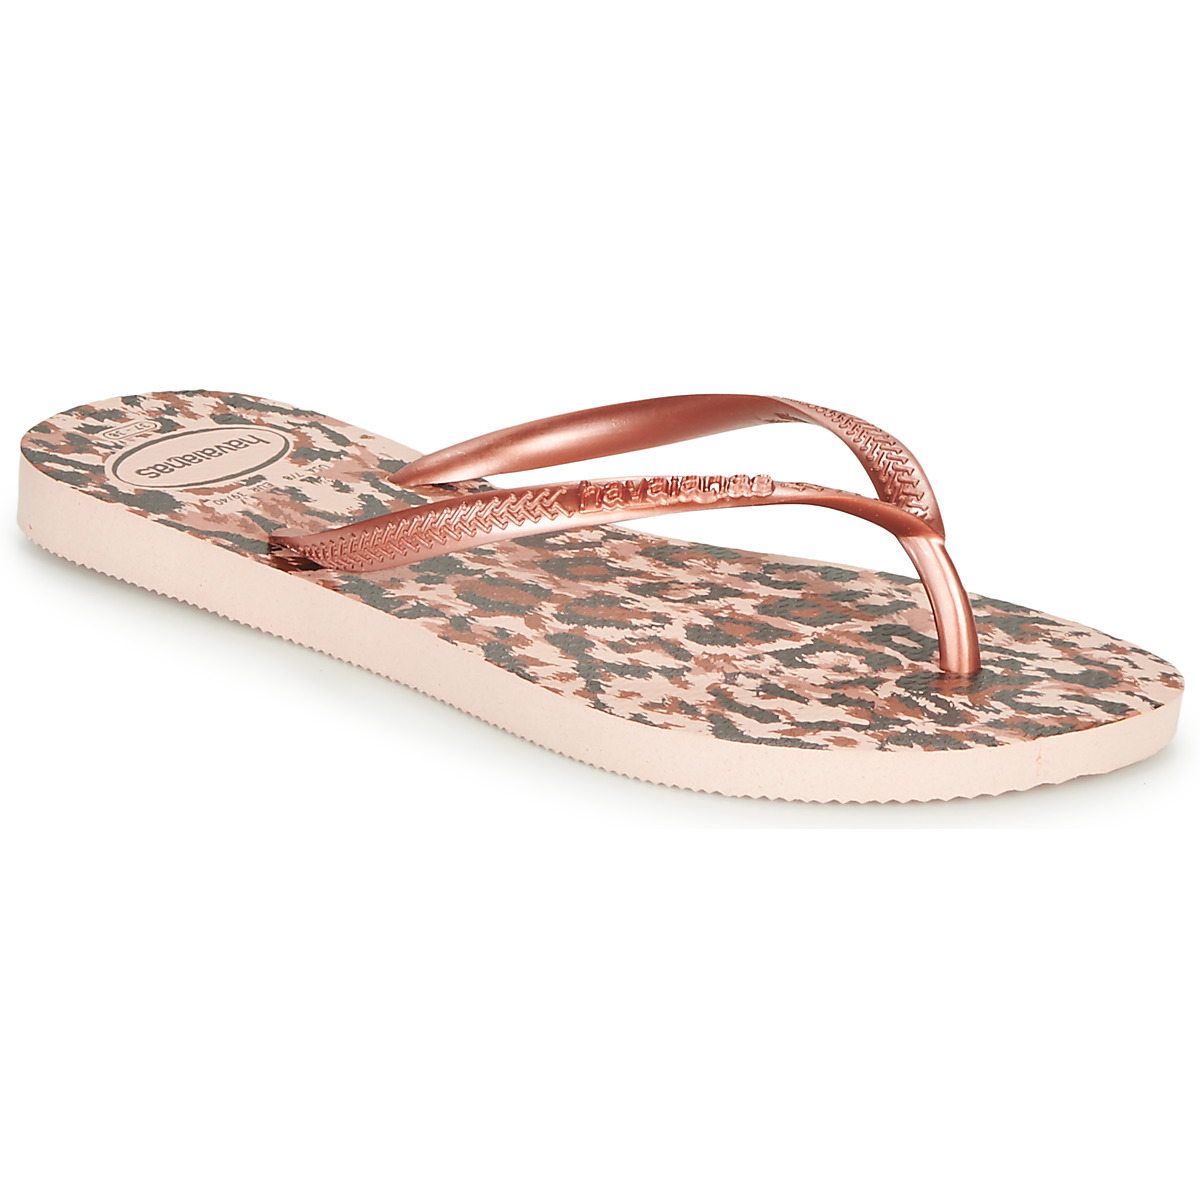 Tongues Femme Havaianas Top Animaux 